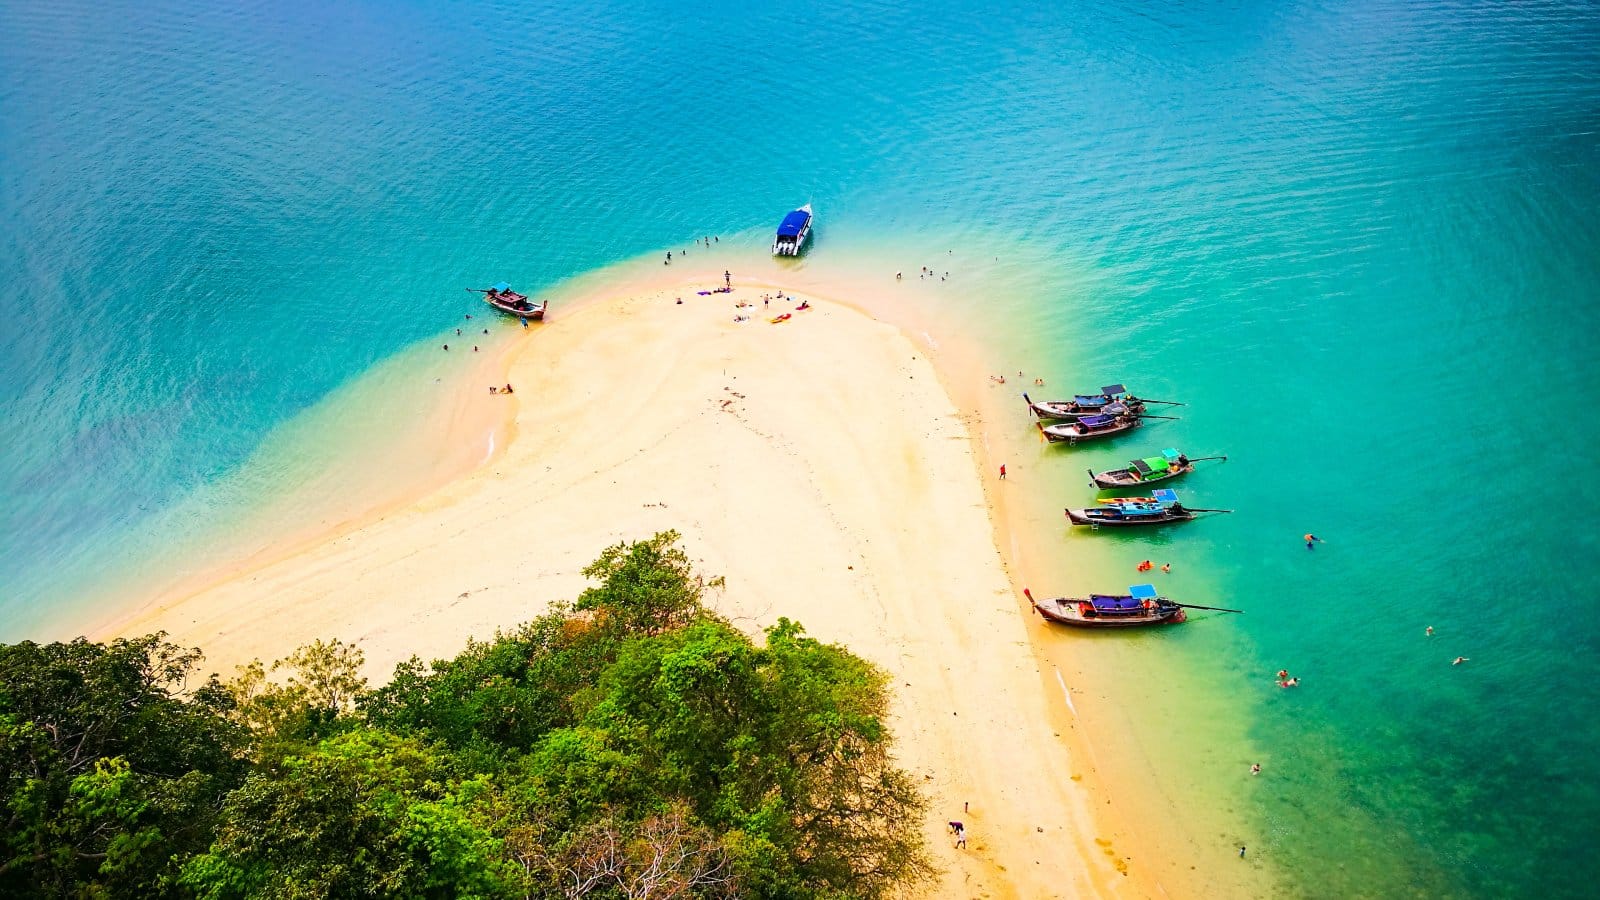 <p class="wp-caption-text">Image Credit: Shutterstock / KOHYAO</p>  <p><span>Koh Yao Noi, a jewel in the emerald waters of Phang Nga Bay, remains one of Thailand’s most serene escapes, offering a rare glimpse into the traditional way of life untouched by mass tourism. The island’s landscape, a picturesque blend of rubber plantations, rice paddies, and mangrove forests, is framed by the stunning backdrop of limestone karsts rising from the sea. For the adventurous, kayaking through the hidden lagoons and secret caves presents an unparalleled opportunity to connect with nature’s majesty. Meanwhile, cycling along the island’s rural roads reveals small villages and local markets, where the pace of life moves to the gentle rhythm of the tides. The island’s commitment to eco-friendly practices is evident in its boutique resorts and homestays, which offer a sustainable way to experience its natural beauty. </span></p>